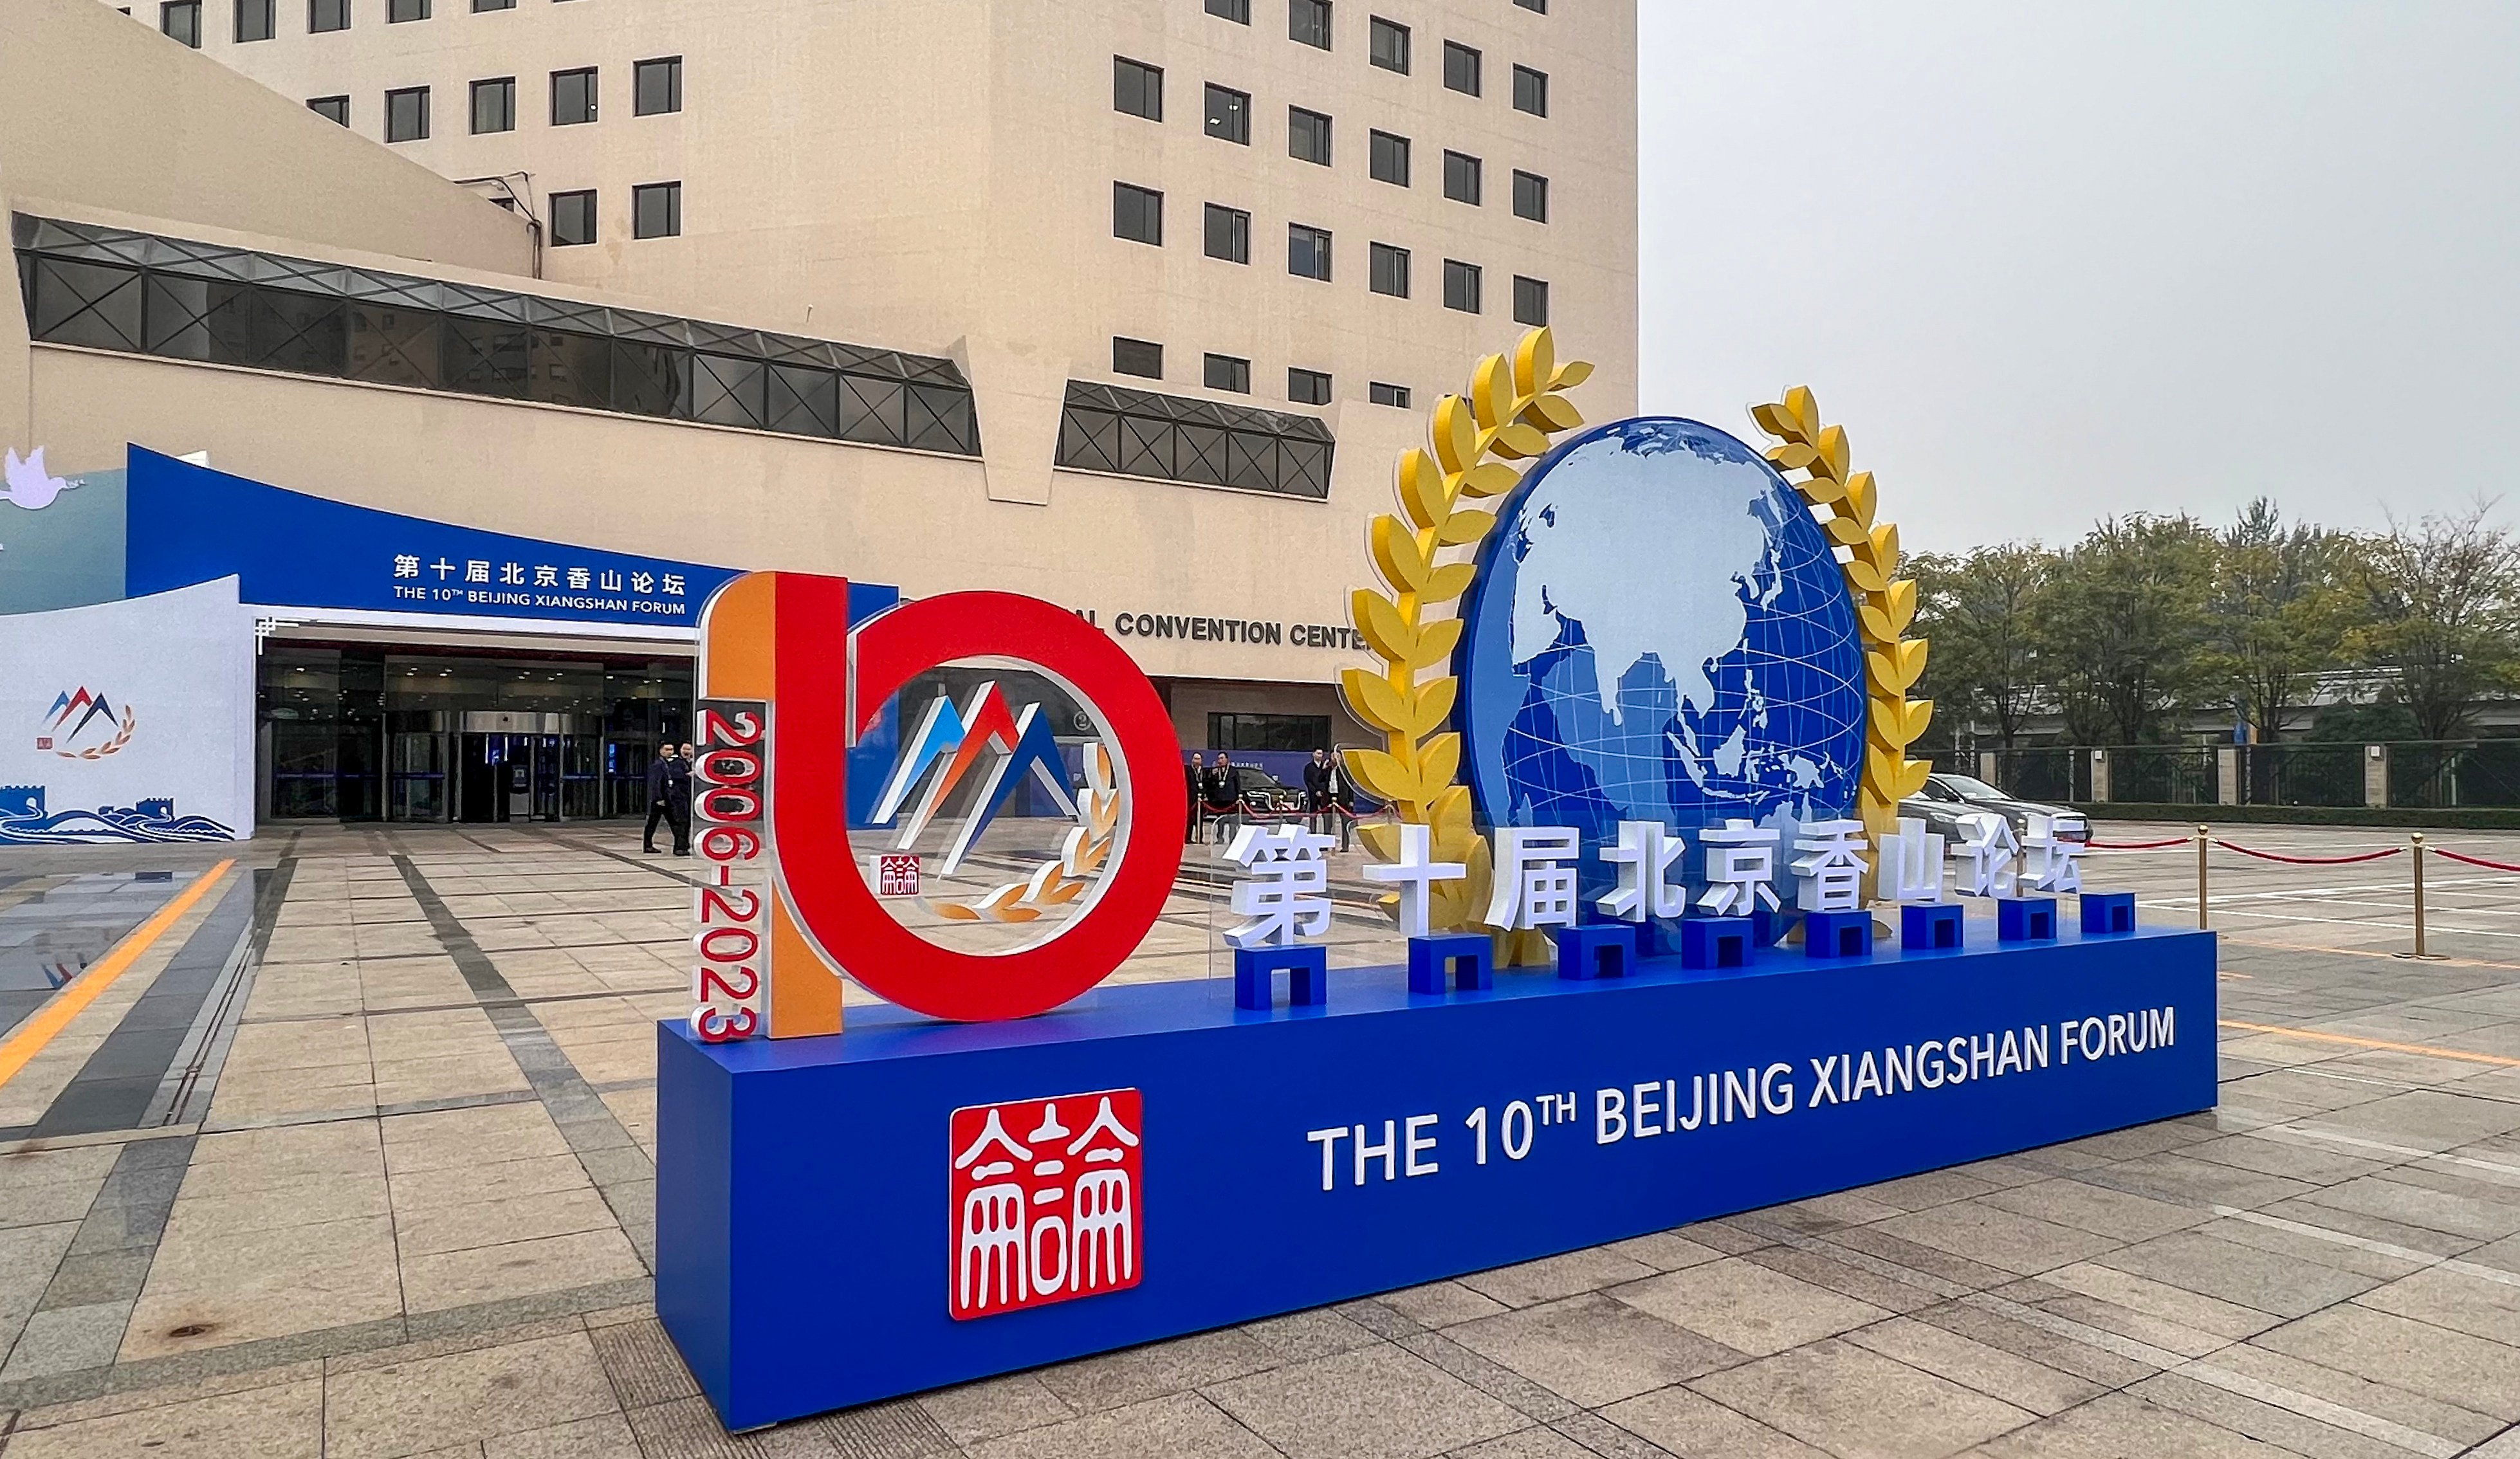 Delegations from 90 countries and international bodies, including 22 defence ministers, are expected to attend the Xiangshan Forum in Beijing. Photo: Minnie Chan